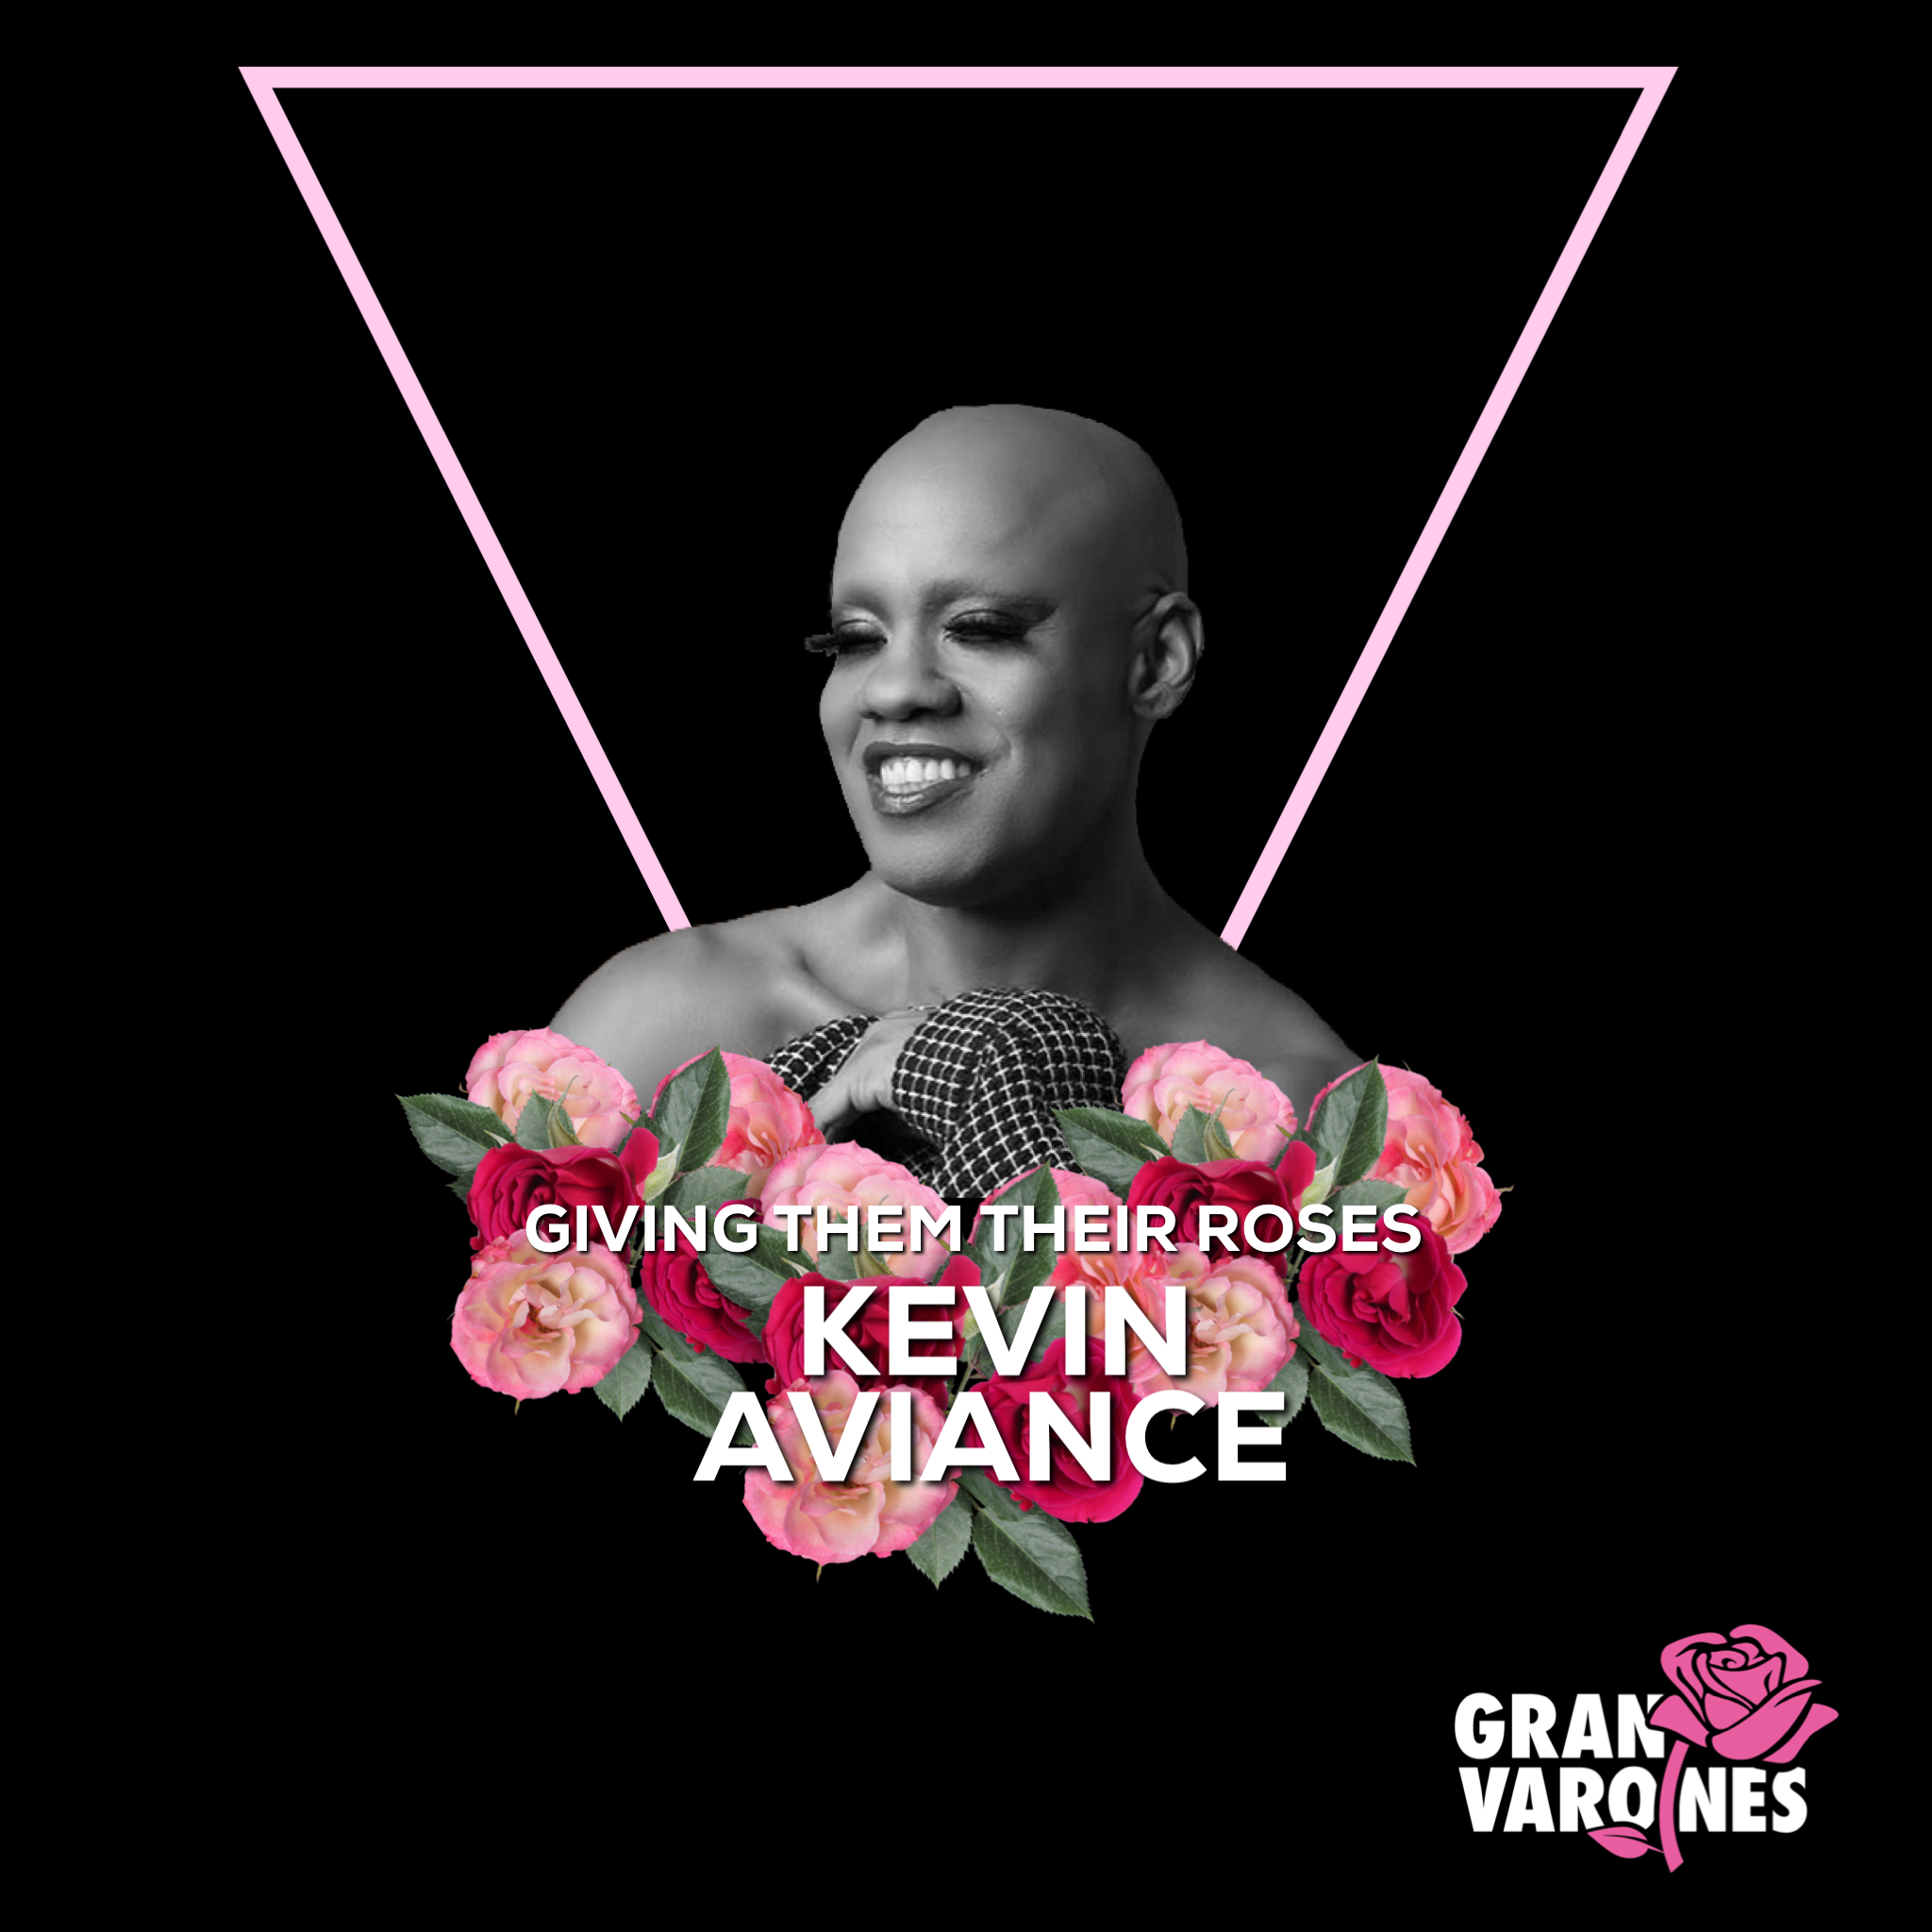 KEVIN AVIANCE